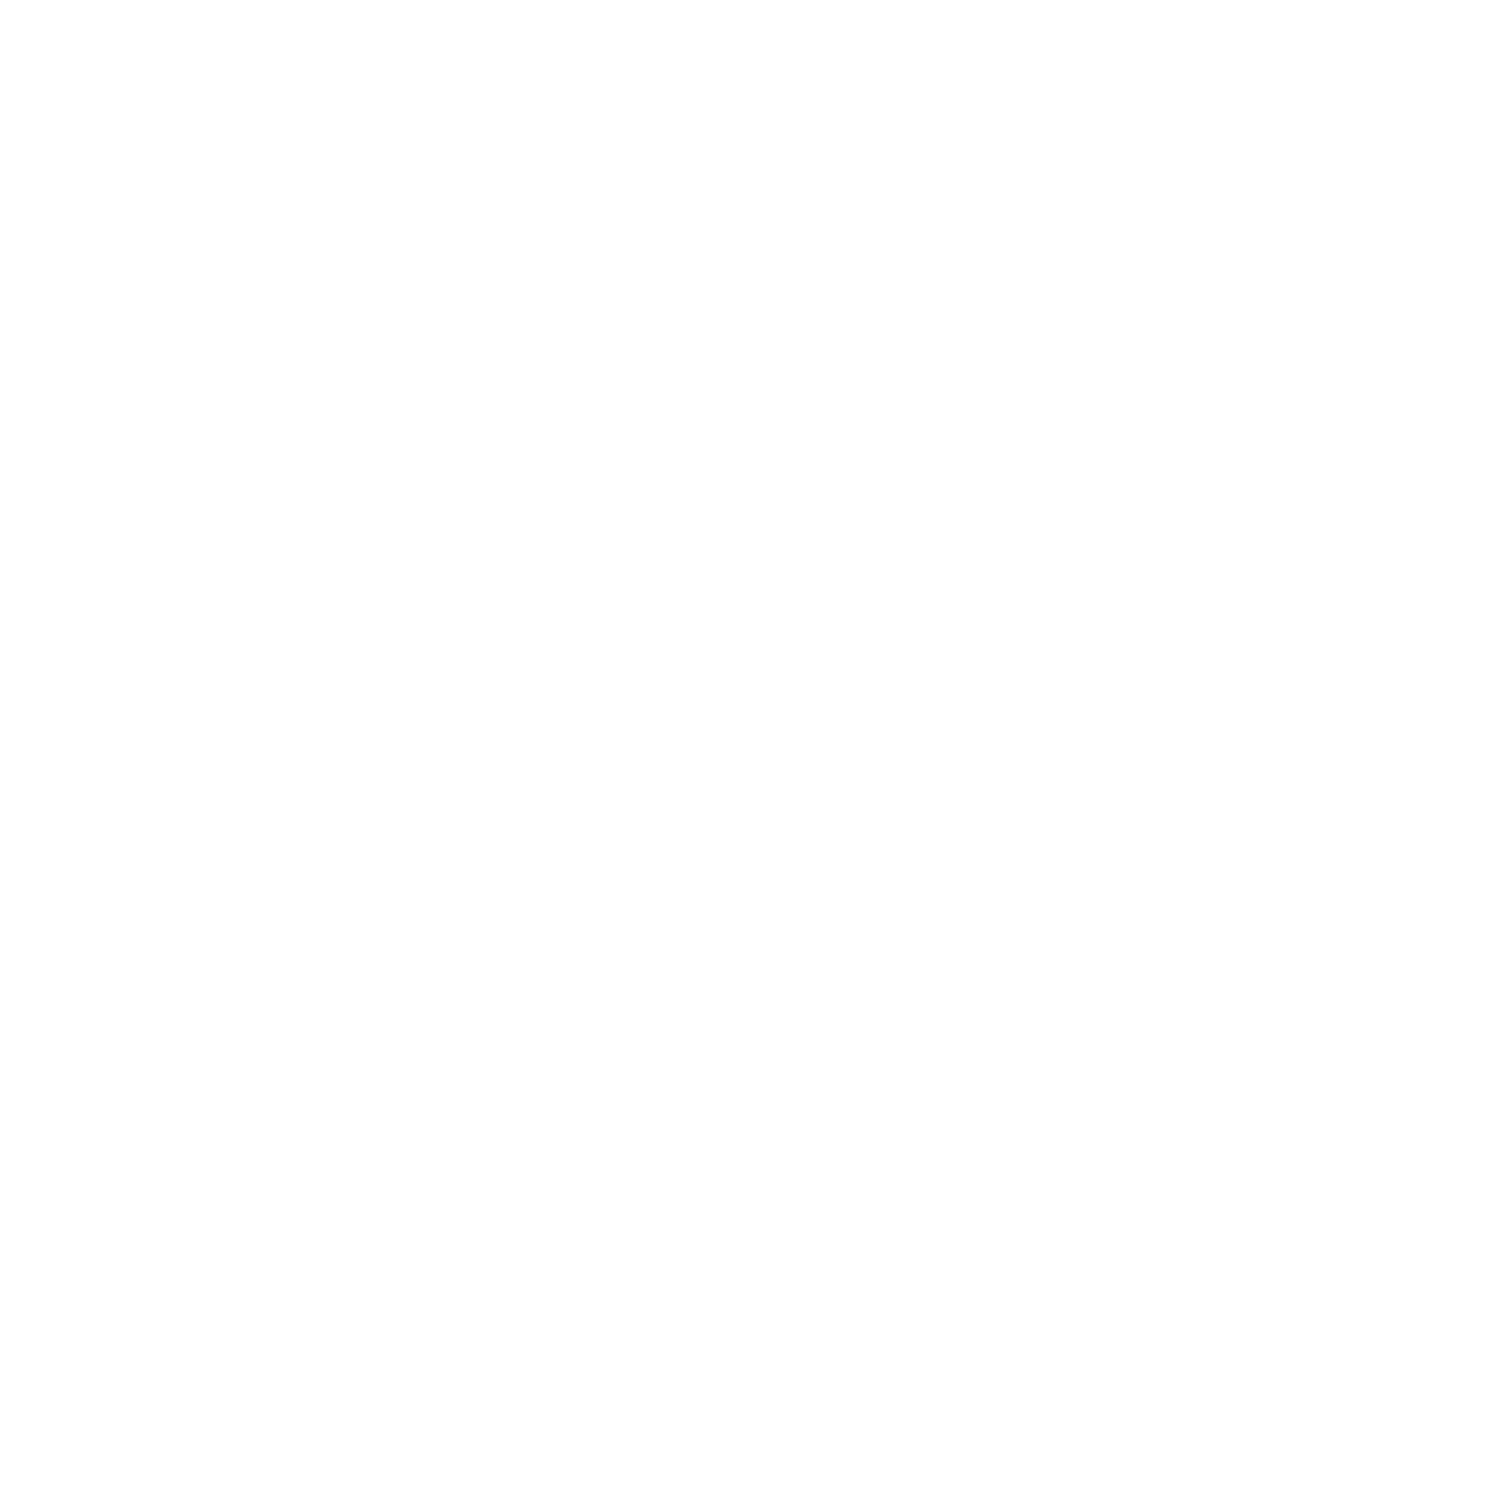 Todd Smith Fitness | Premier Personal Training Facility 